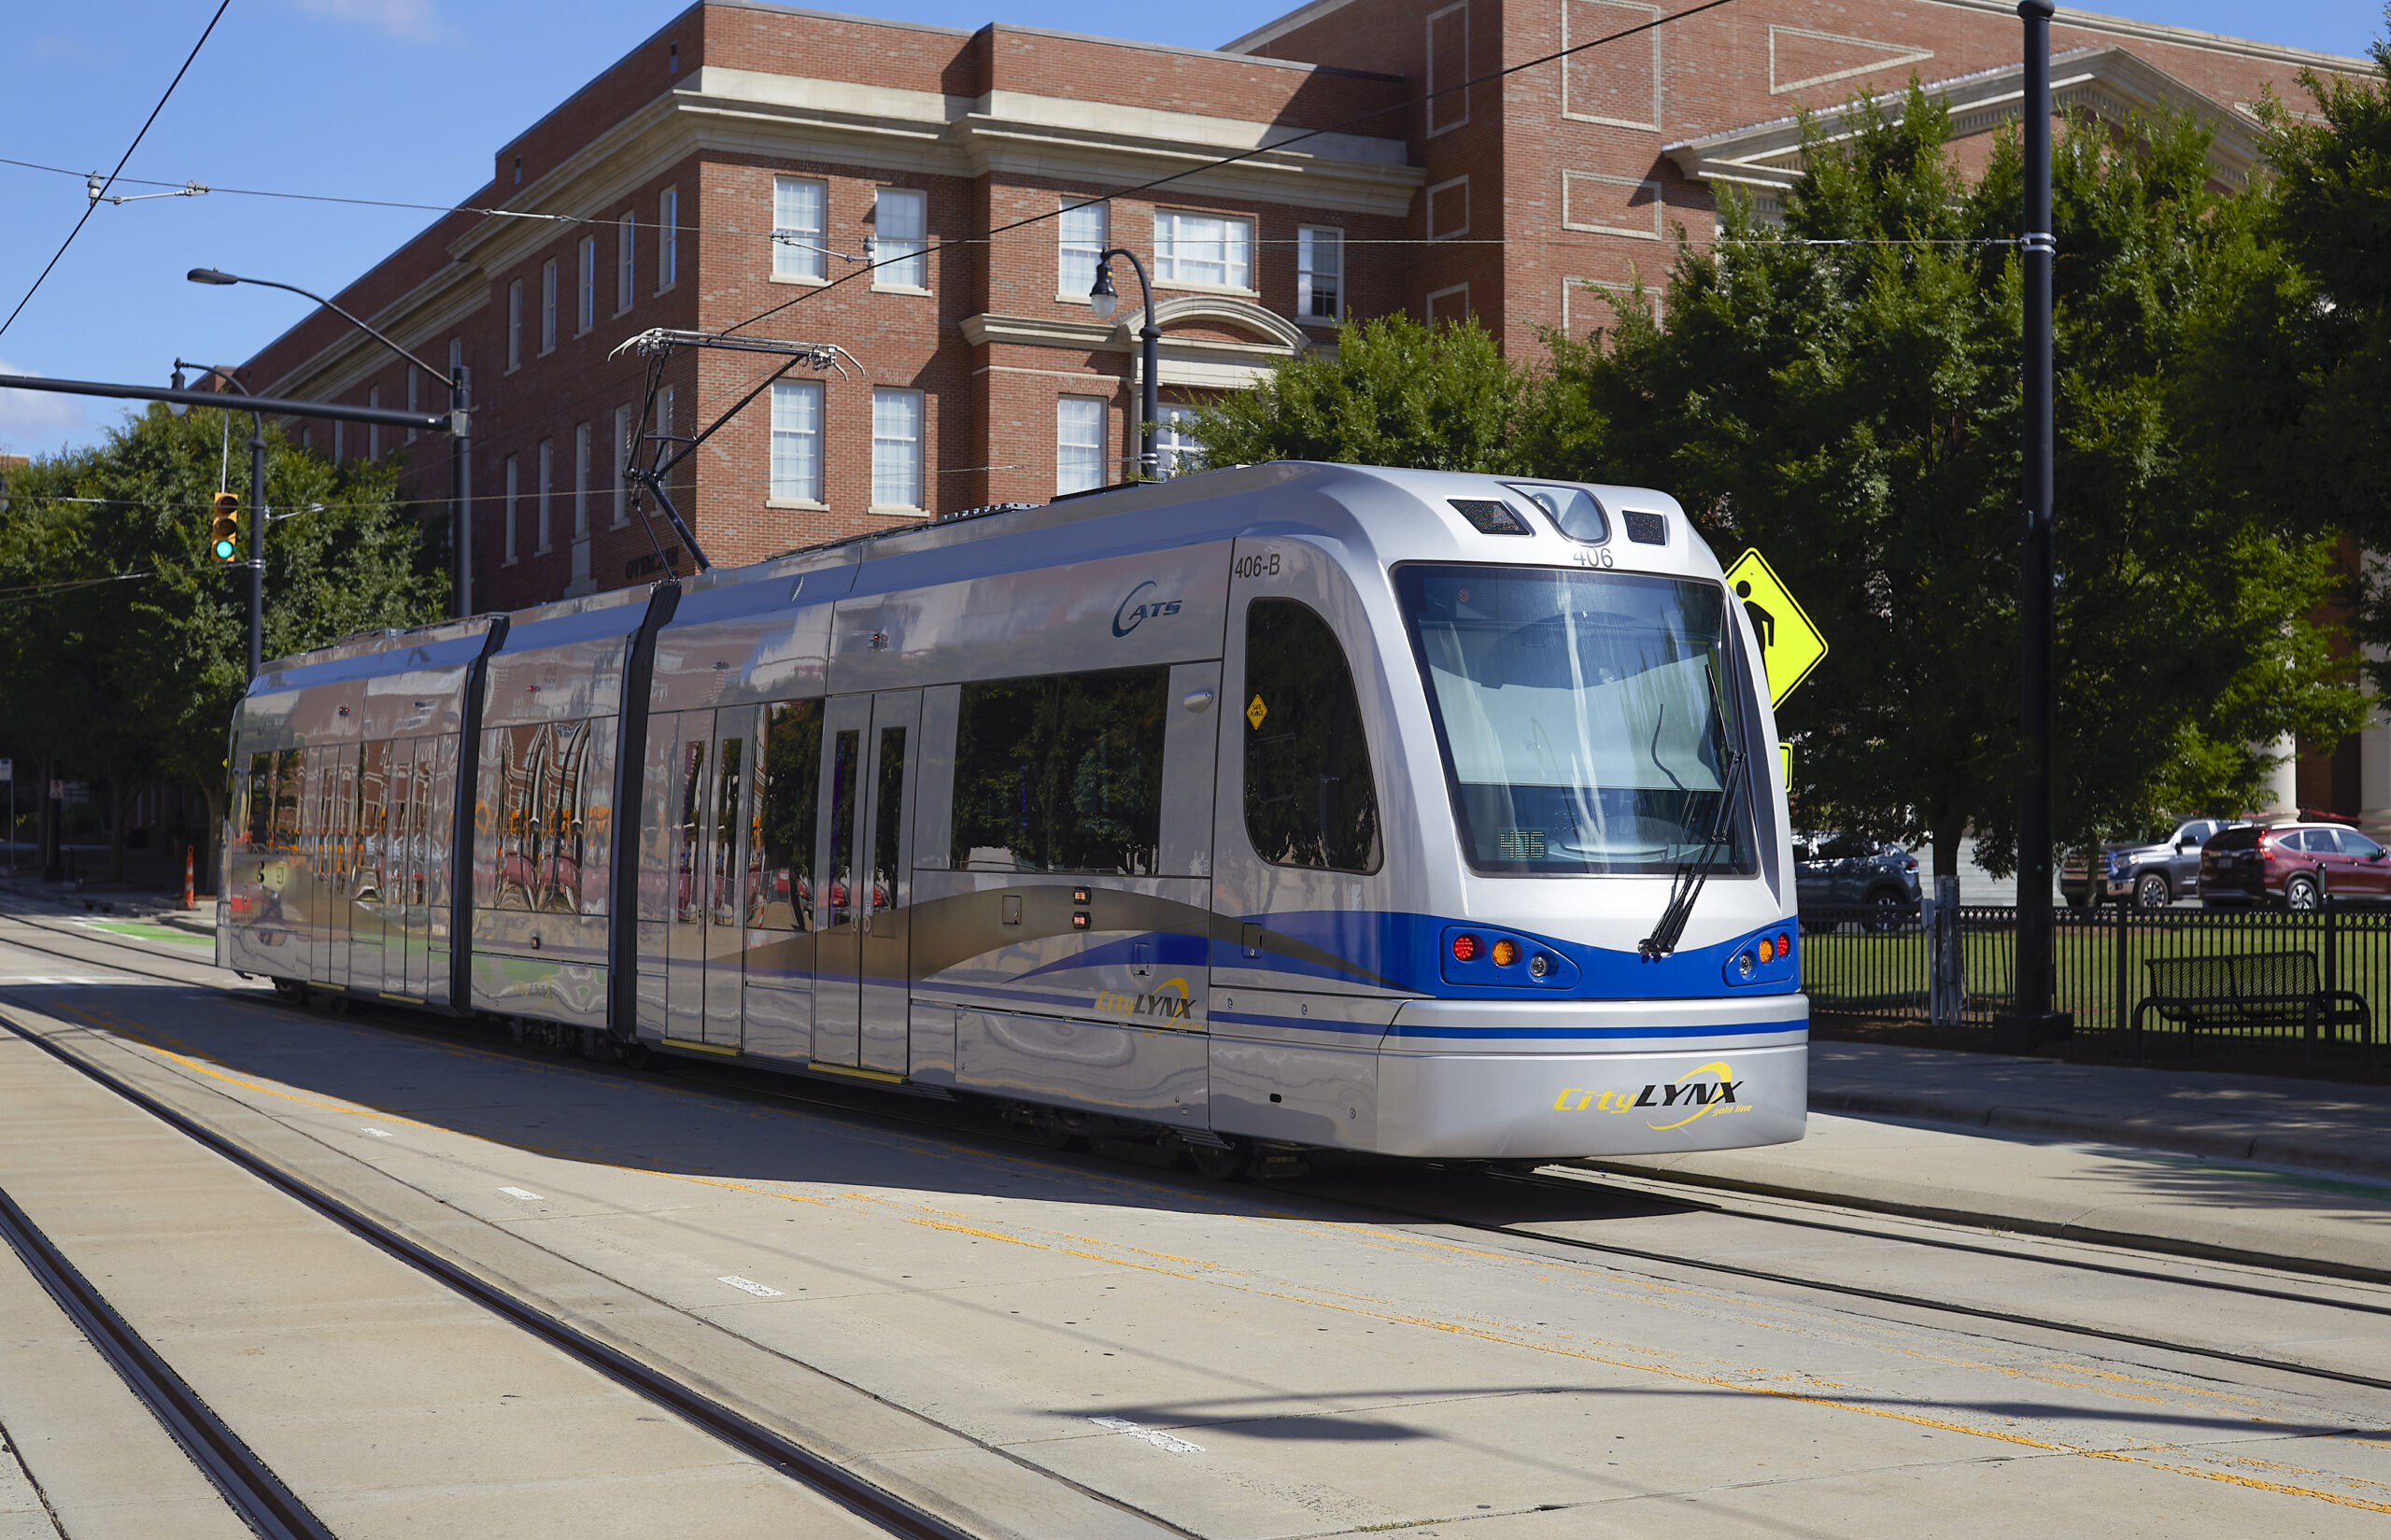 Hybrid tram of Siemens Mobility in the street of Charlotte, USA